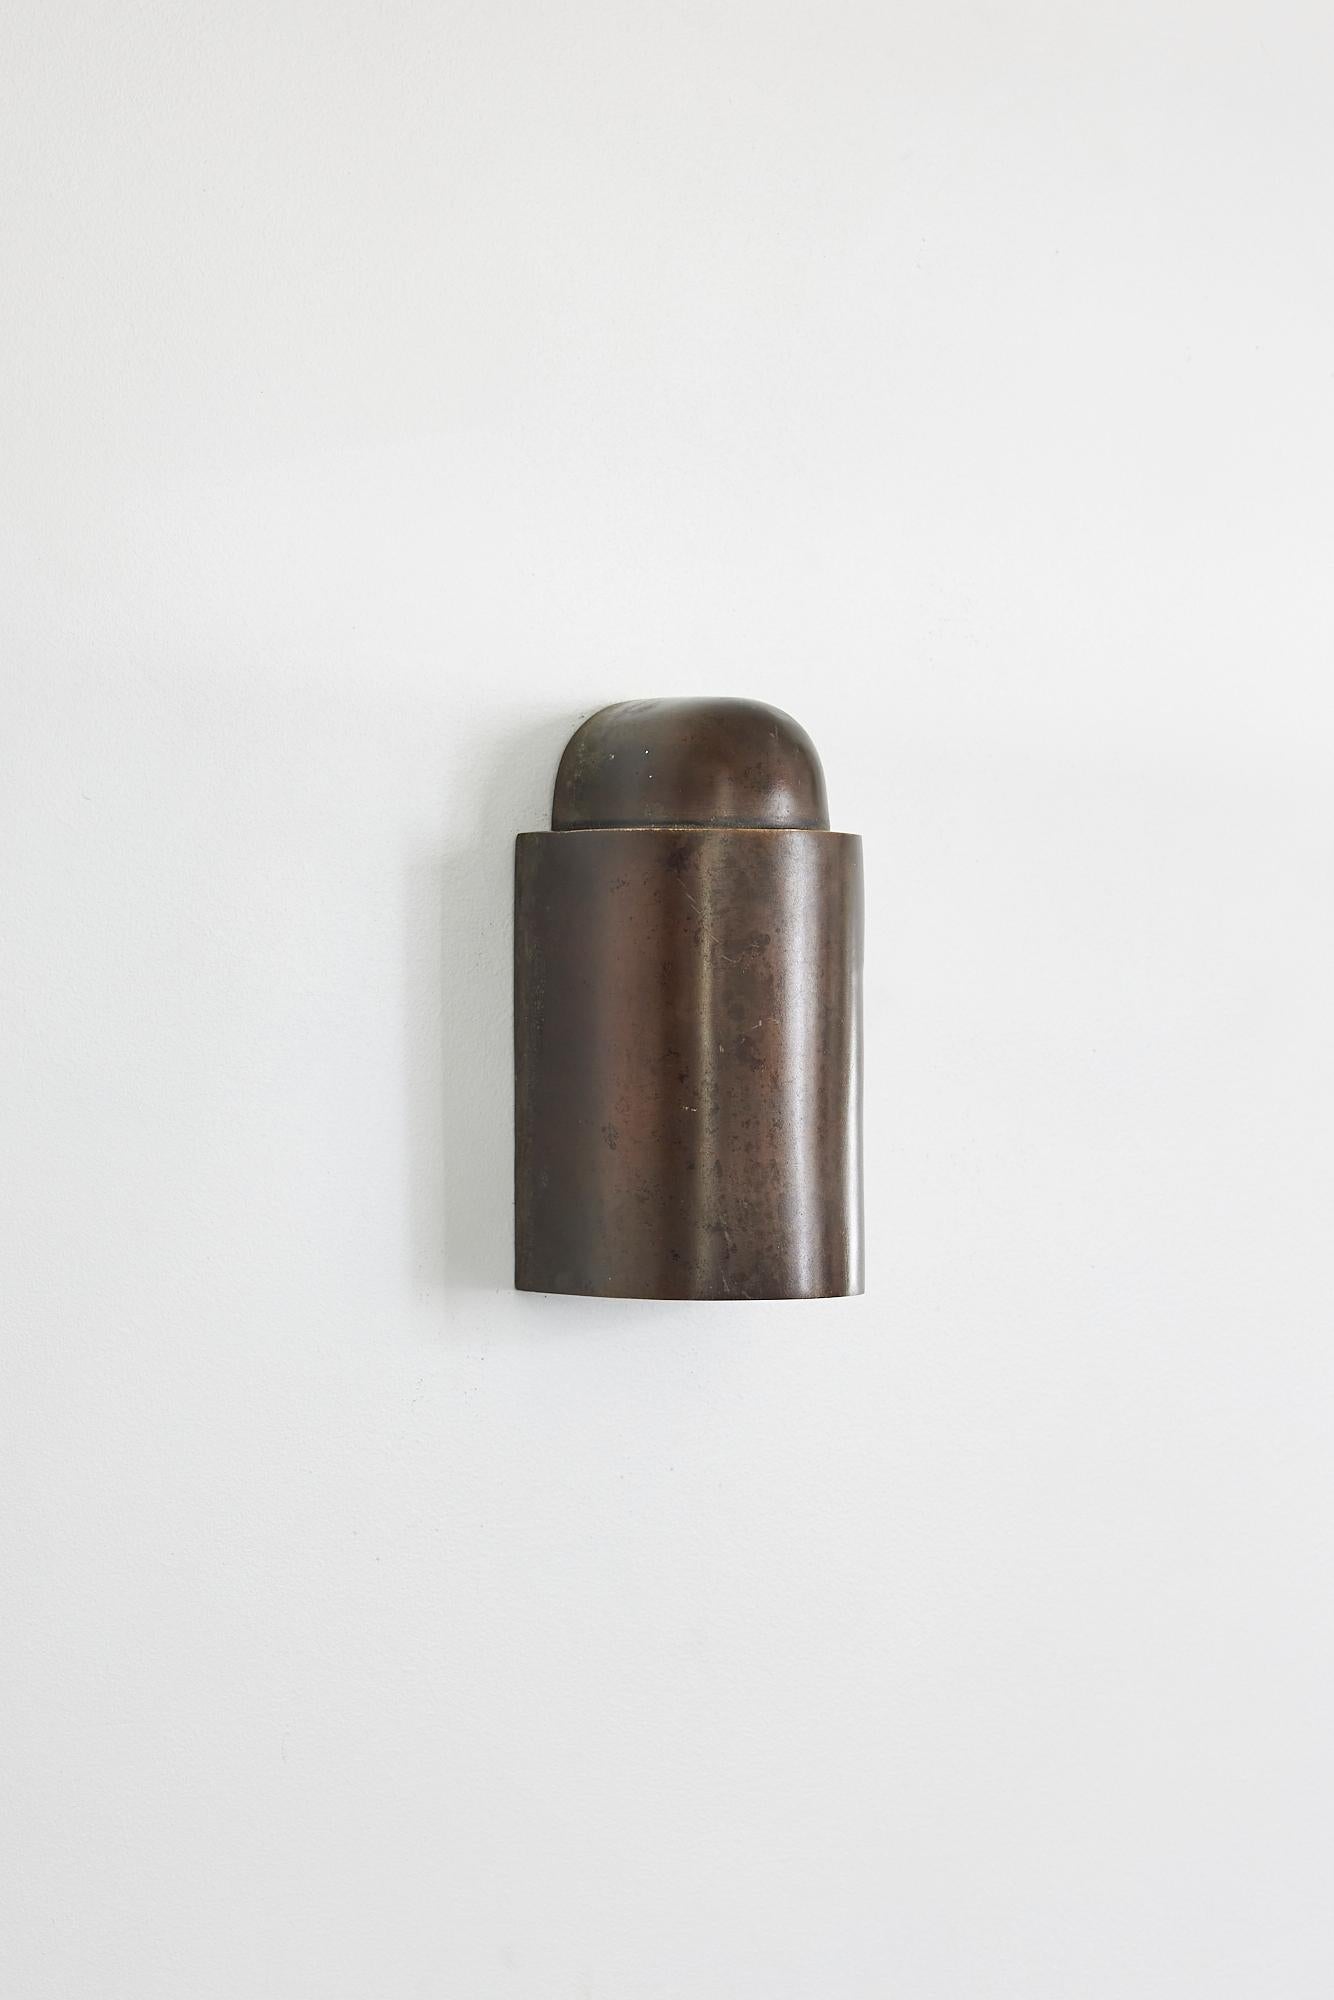 Australian Decade Wall Light, Weathered Brass by Dunlin For Sale